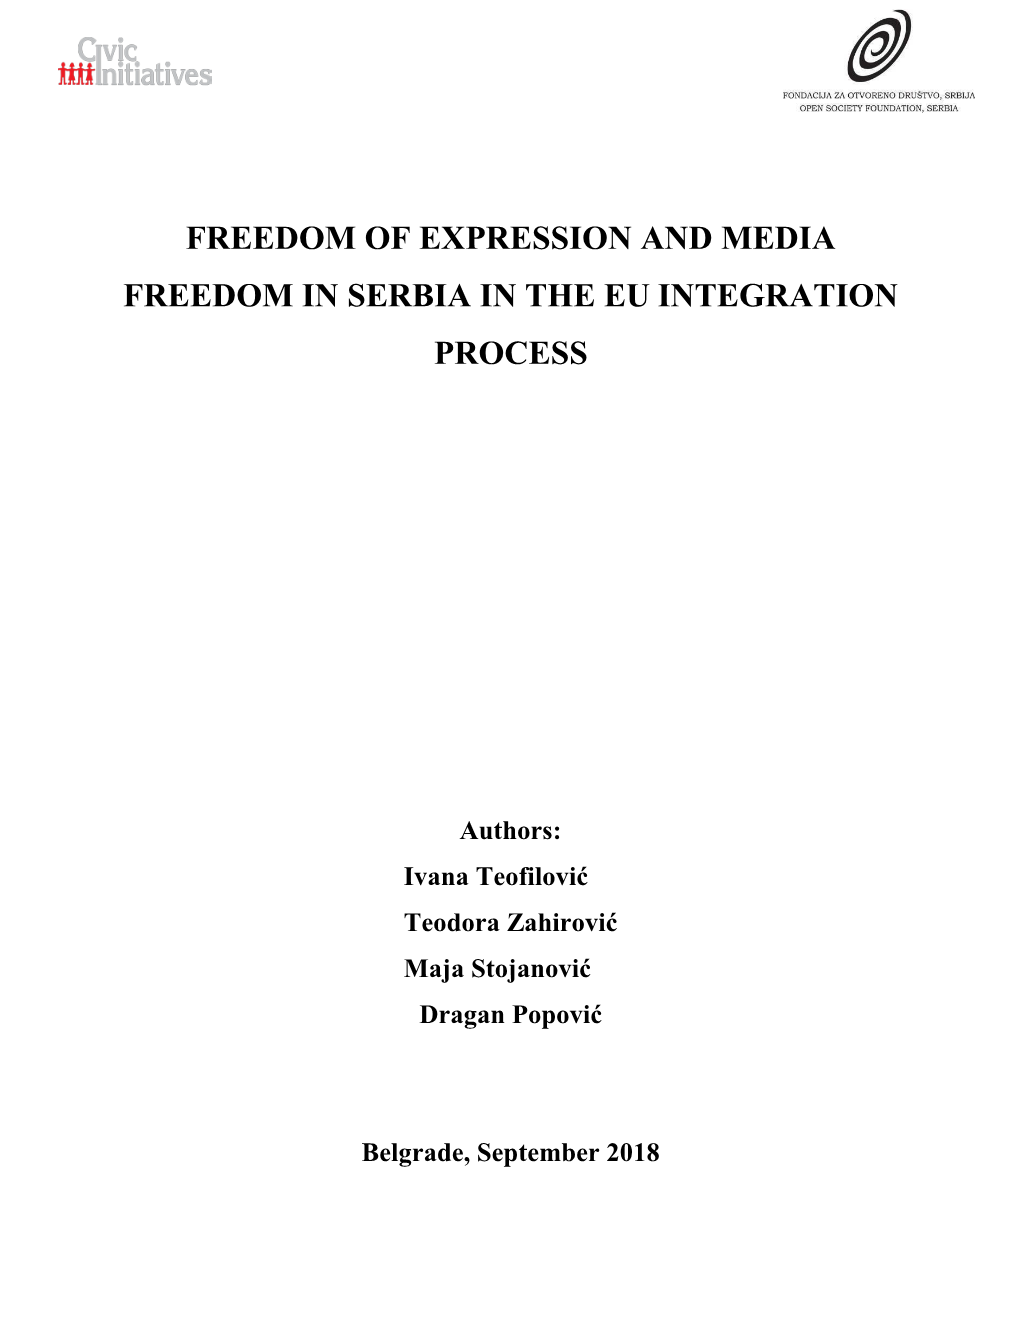 Freedom of Expression and Media Freedom in Serbia in the Eu Integration Process